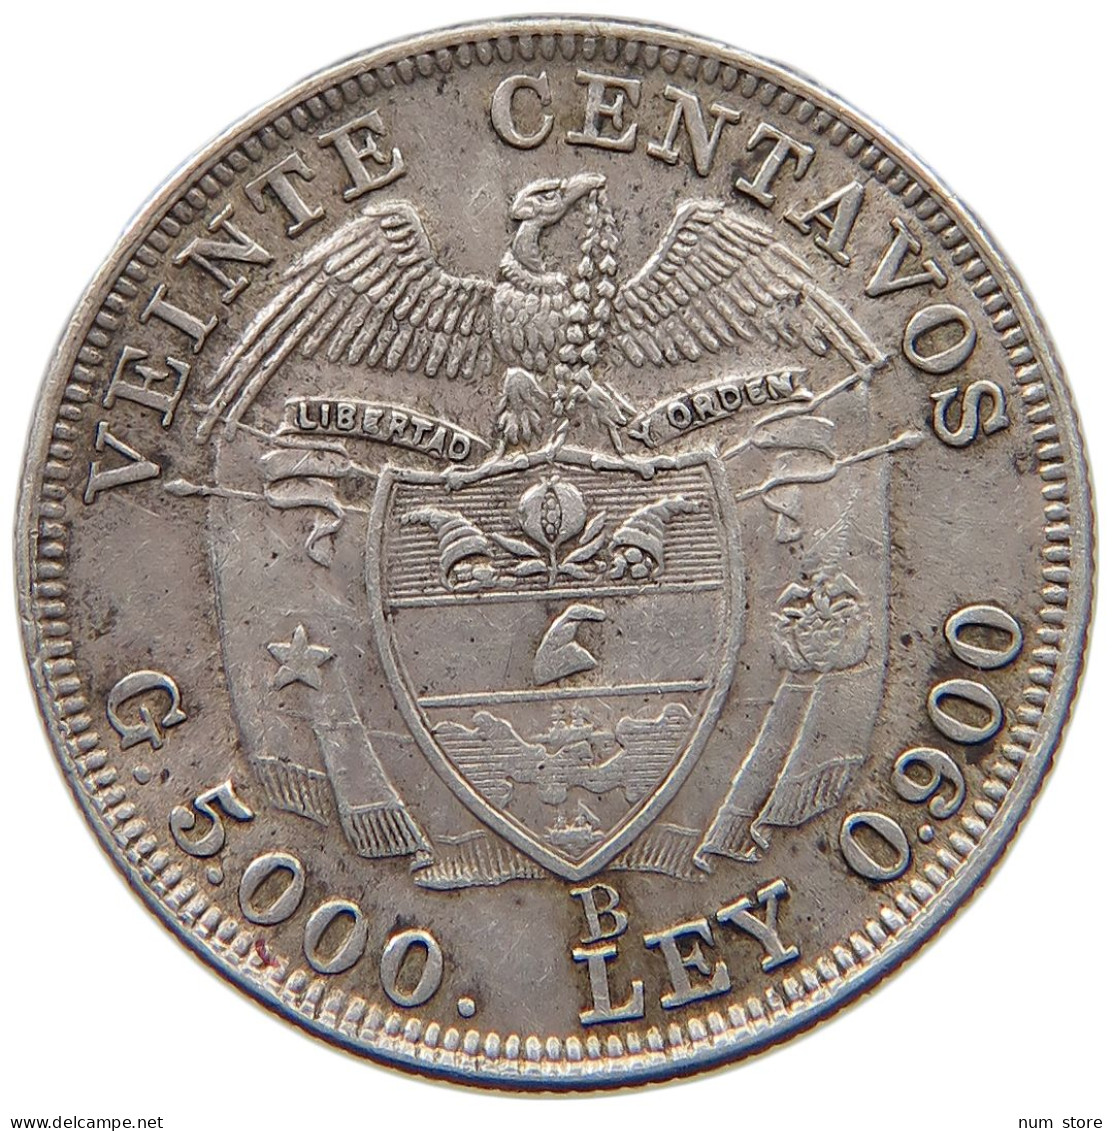 COLOMBIA 20 CENTAVOS 1933 OVERSTRUCK #t156 0033 - Colombia